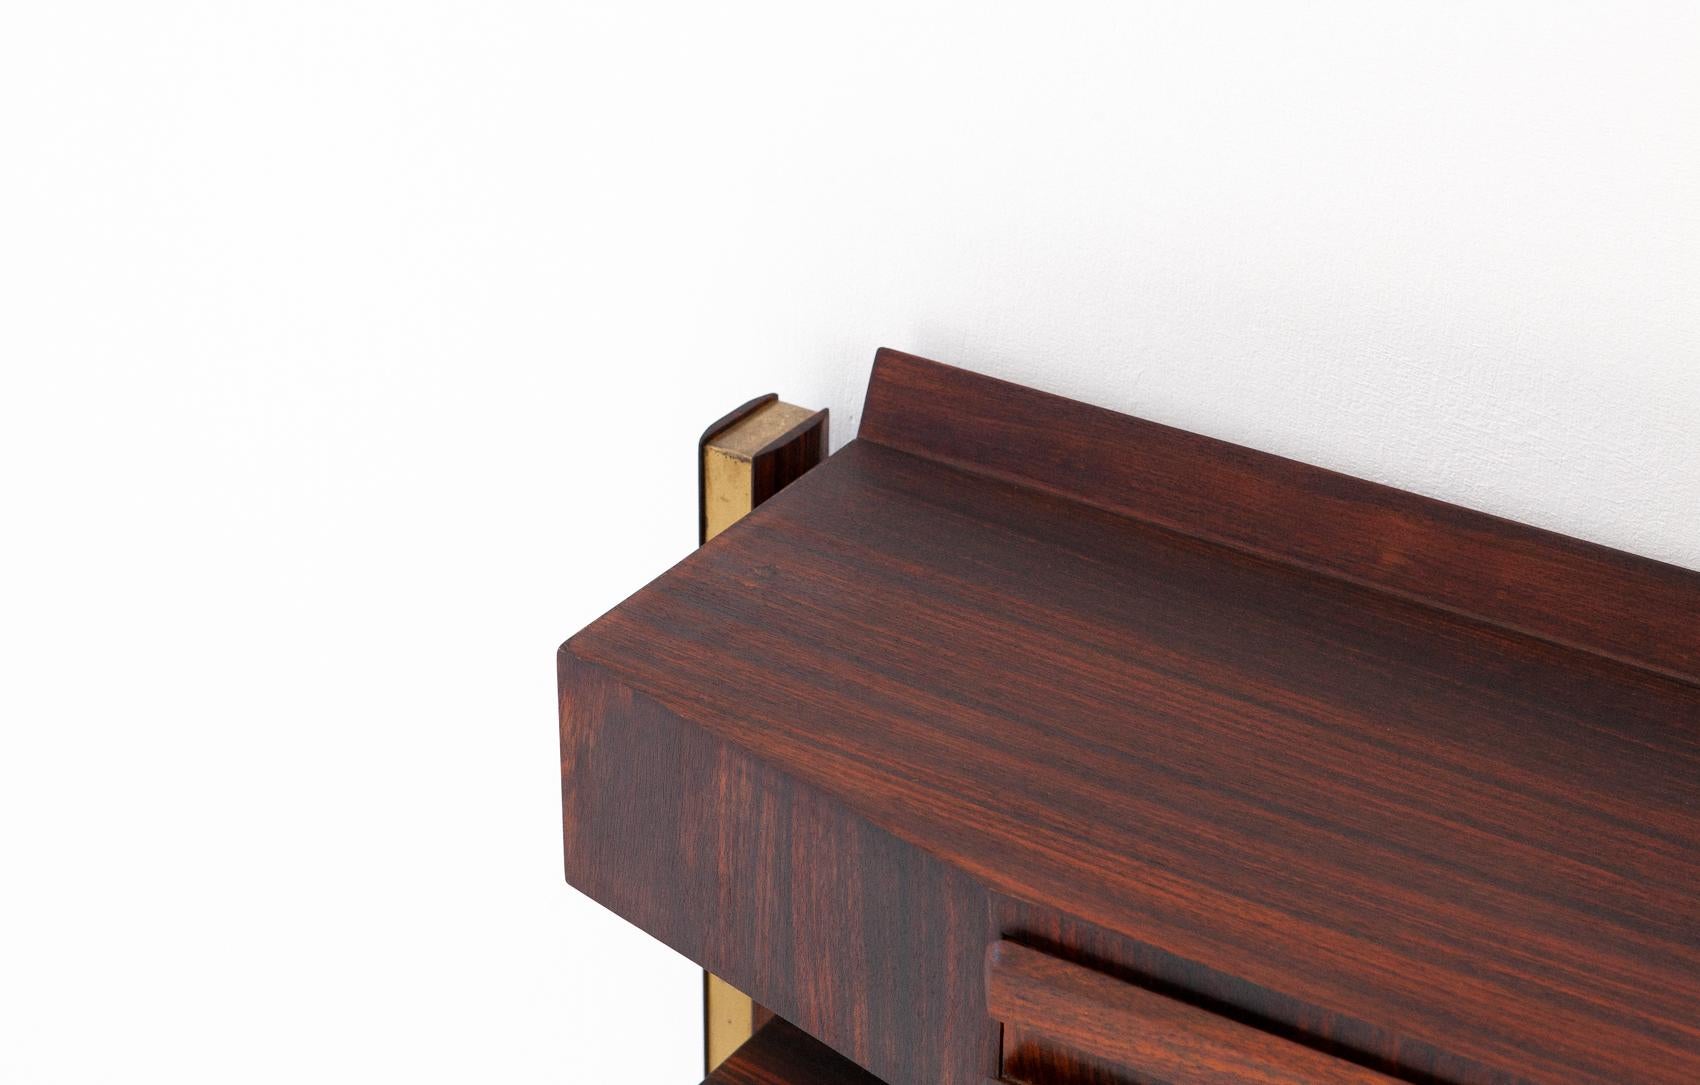 Italian modern console table in rosewood and brass.

Completely restored: As we normally prefer, the original finish has been completely removed to bring the wood back to its original state, then it has been finished with Japanese oil, this